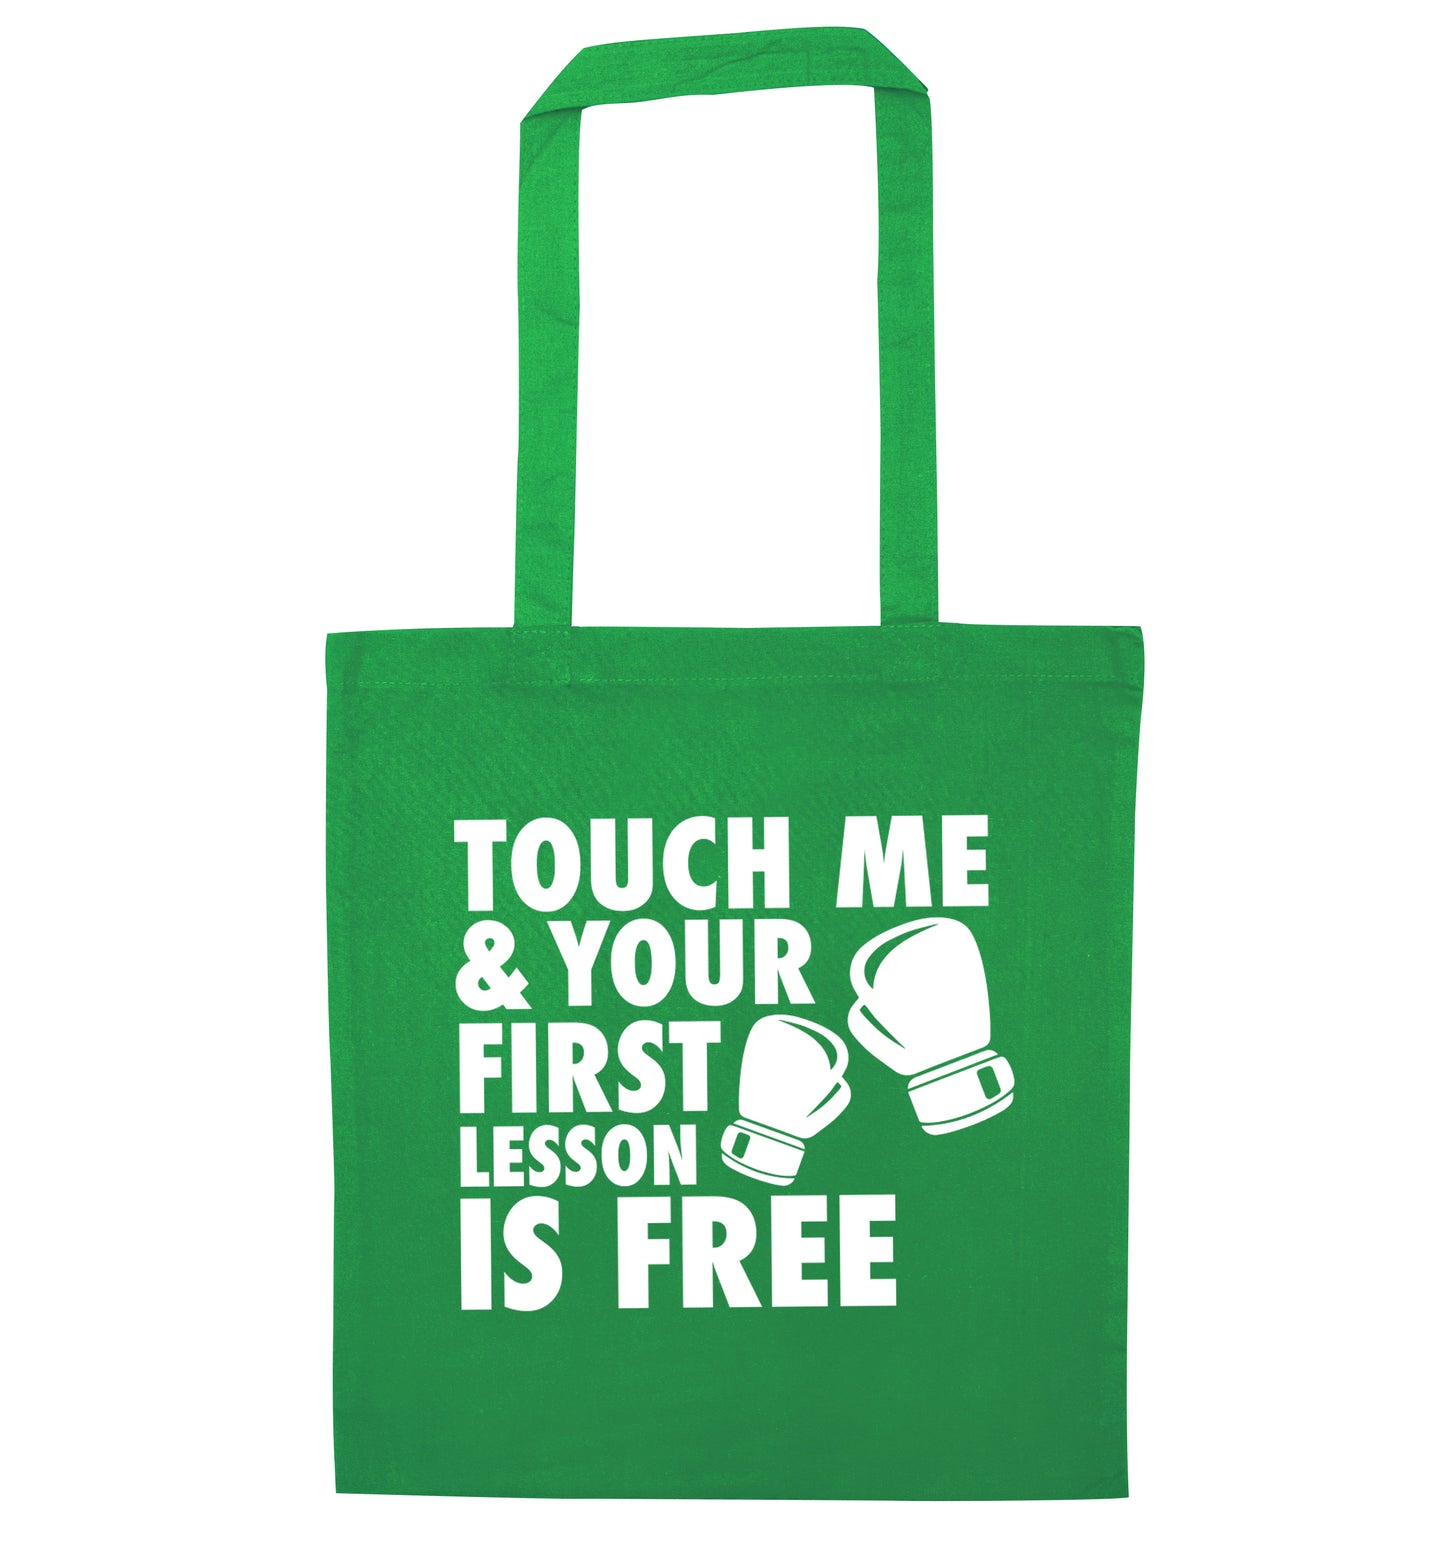 Touch me and your First Lesson is Free  green tote bag